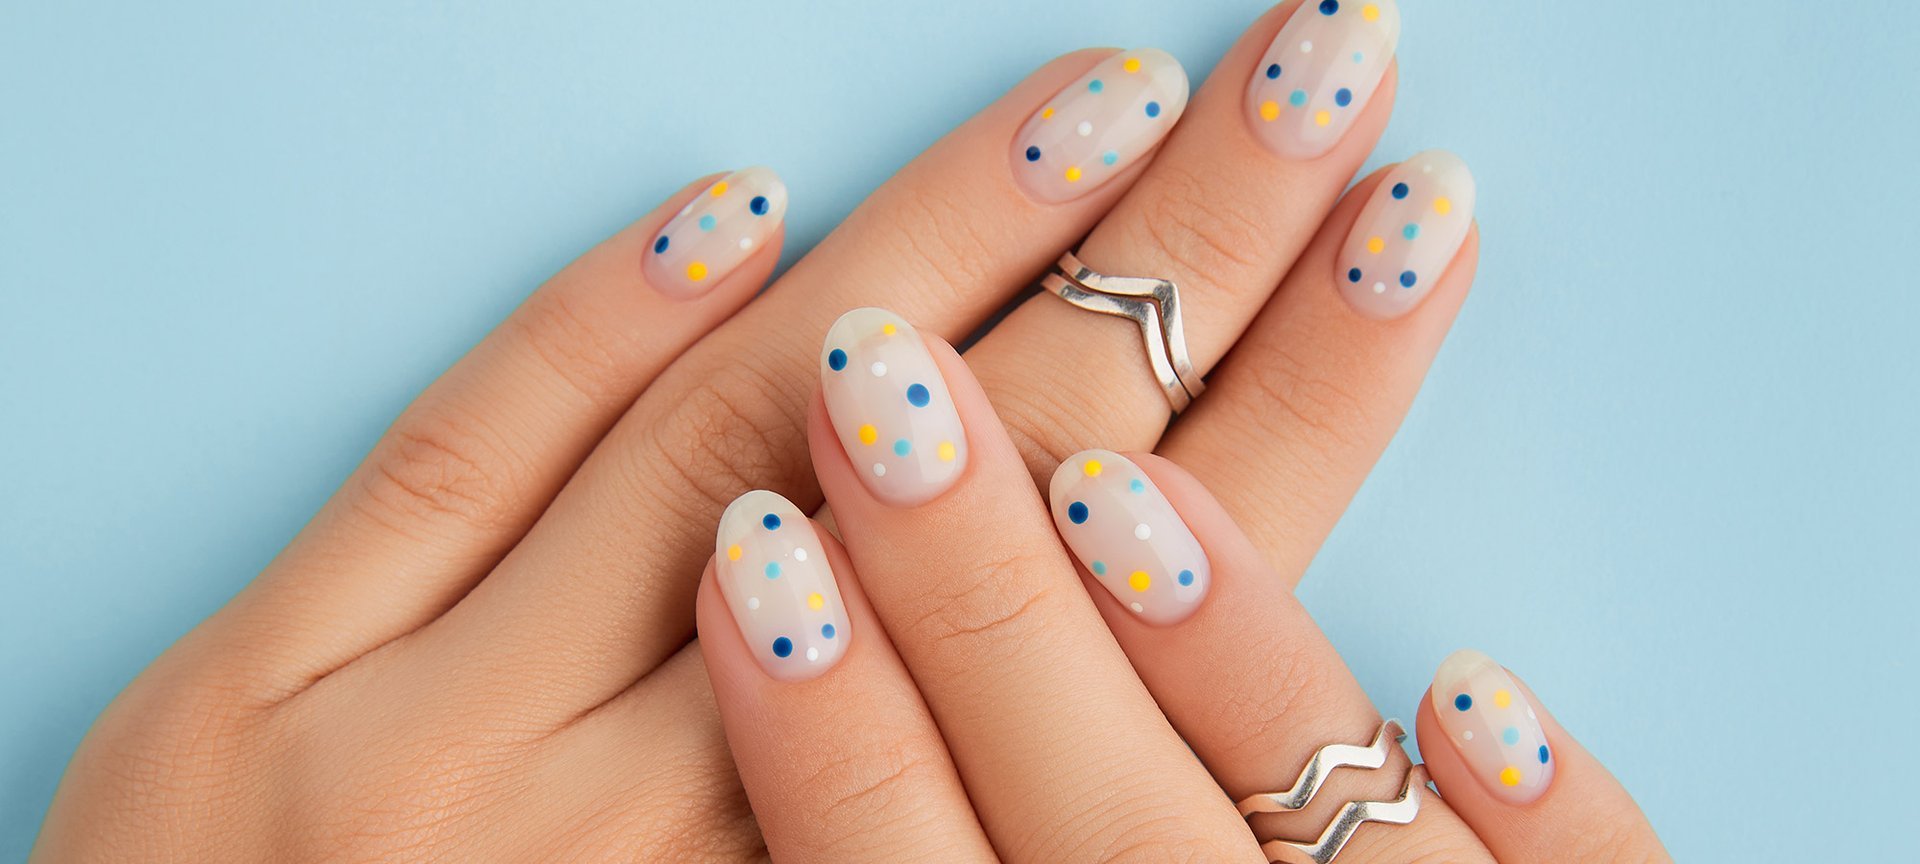 Does It Work: Hot Designs Nail Art Pens